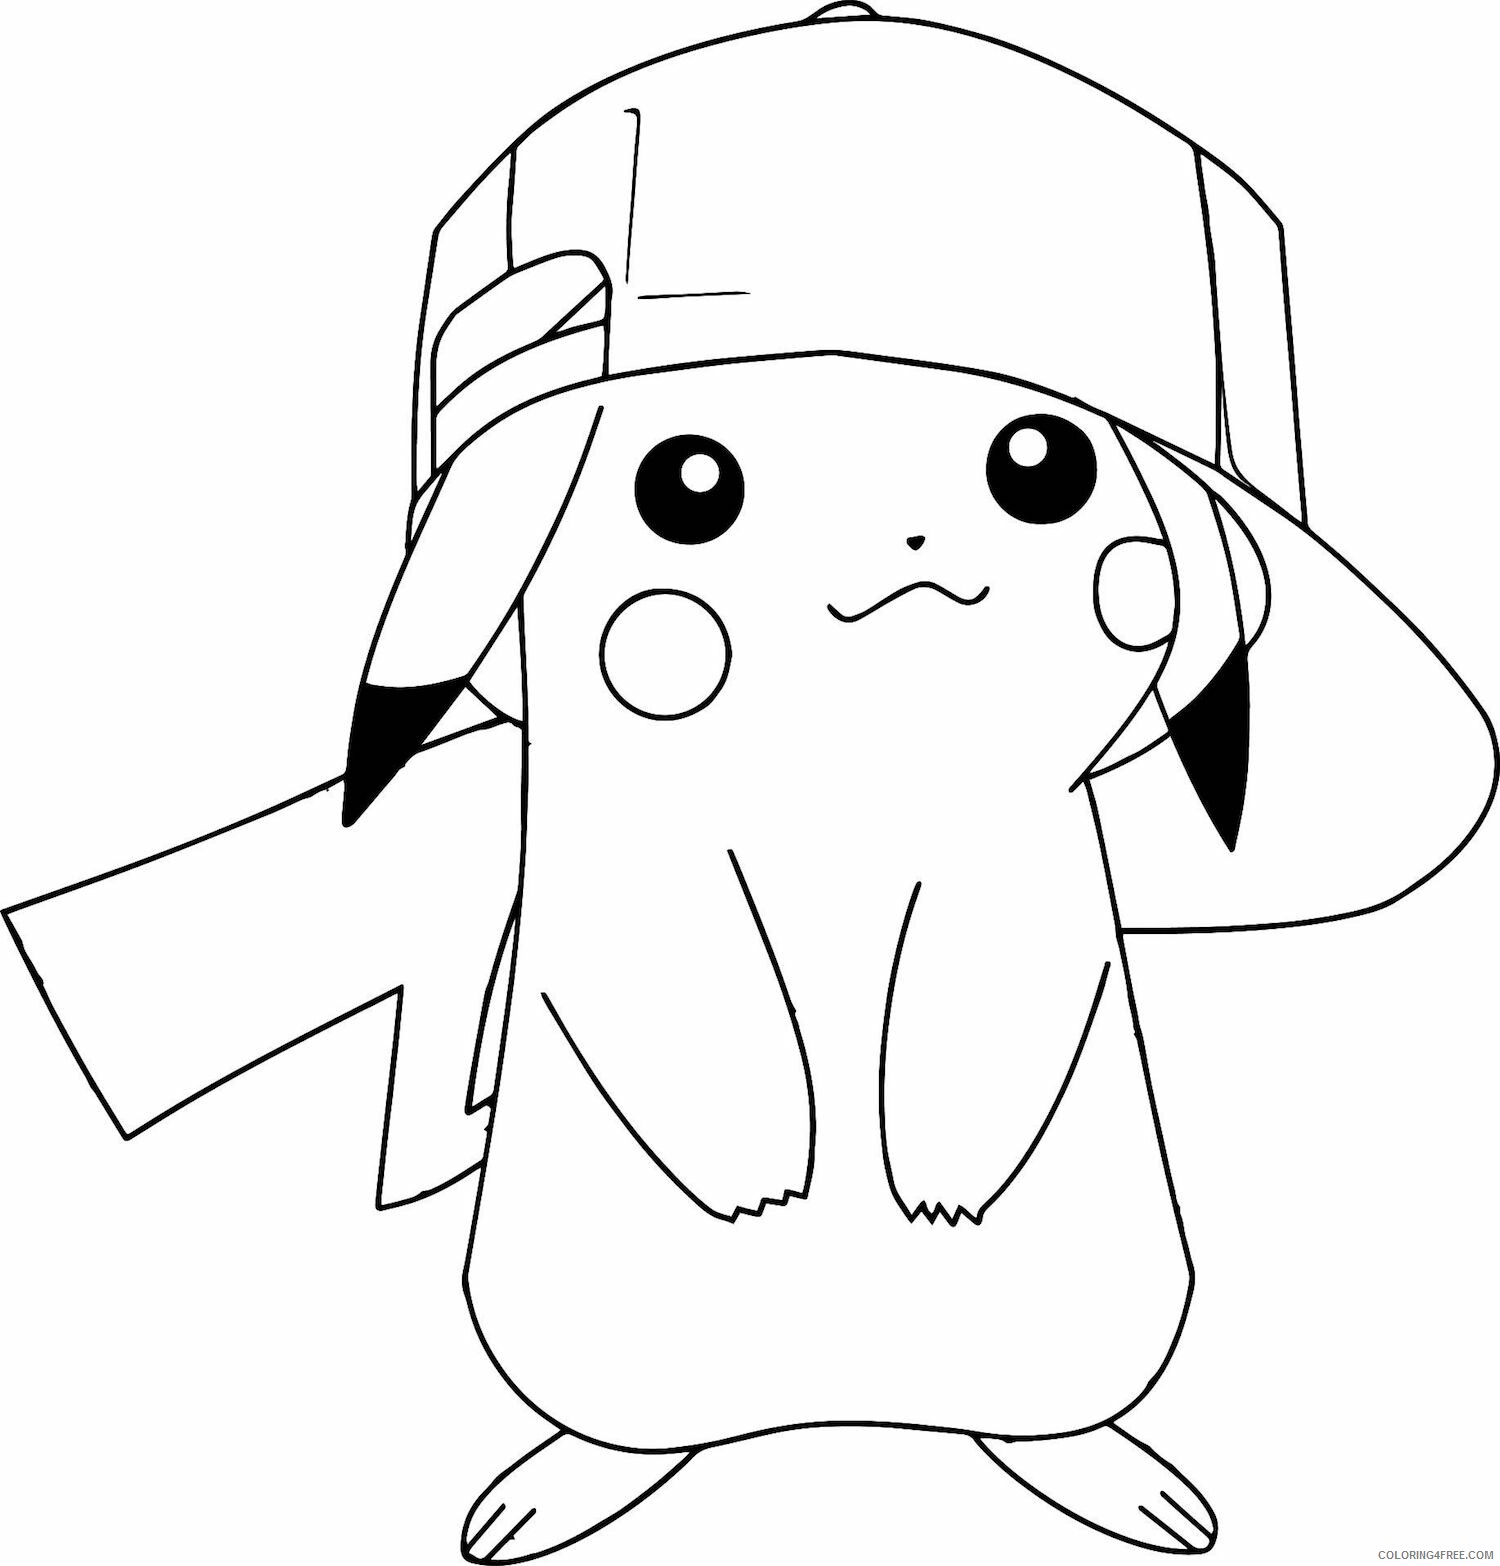 Pikachu Printable Coloring Pages Anime Cute Pikachu in Ashs Hat 2021 0935 Coloring4free